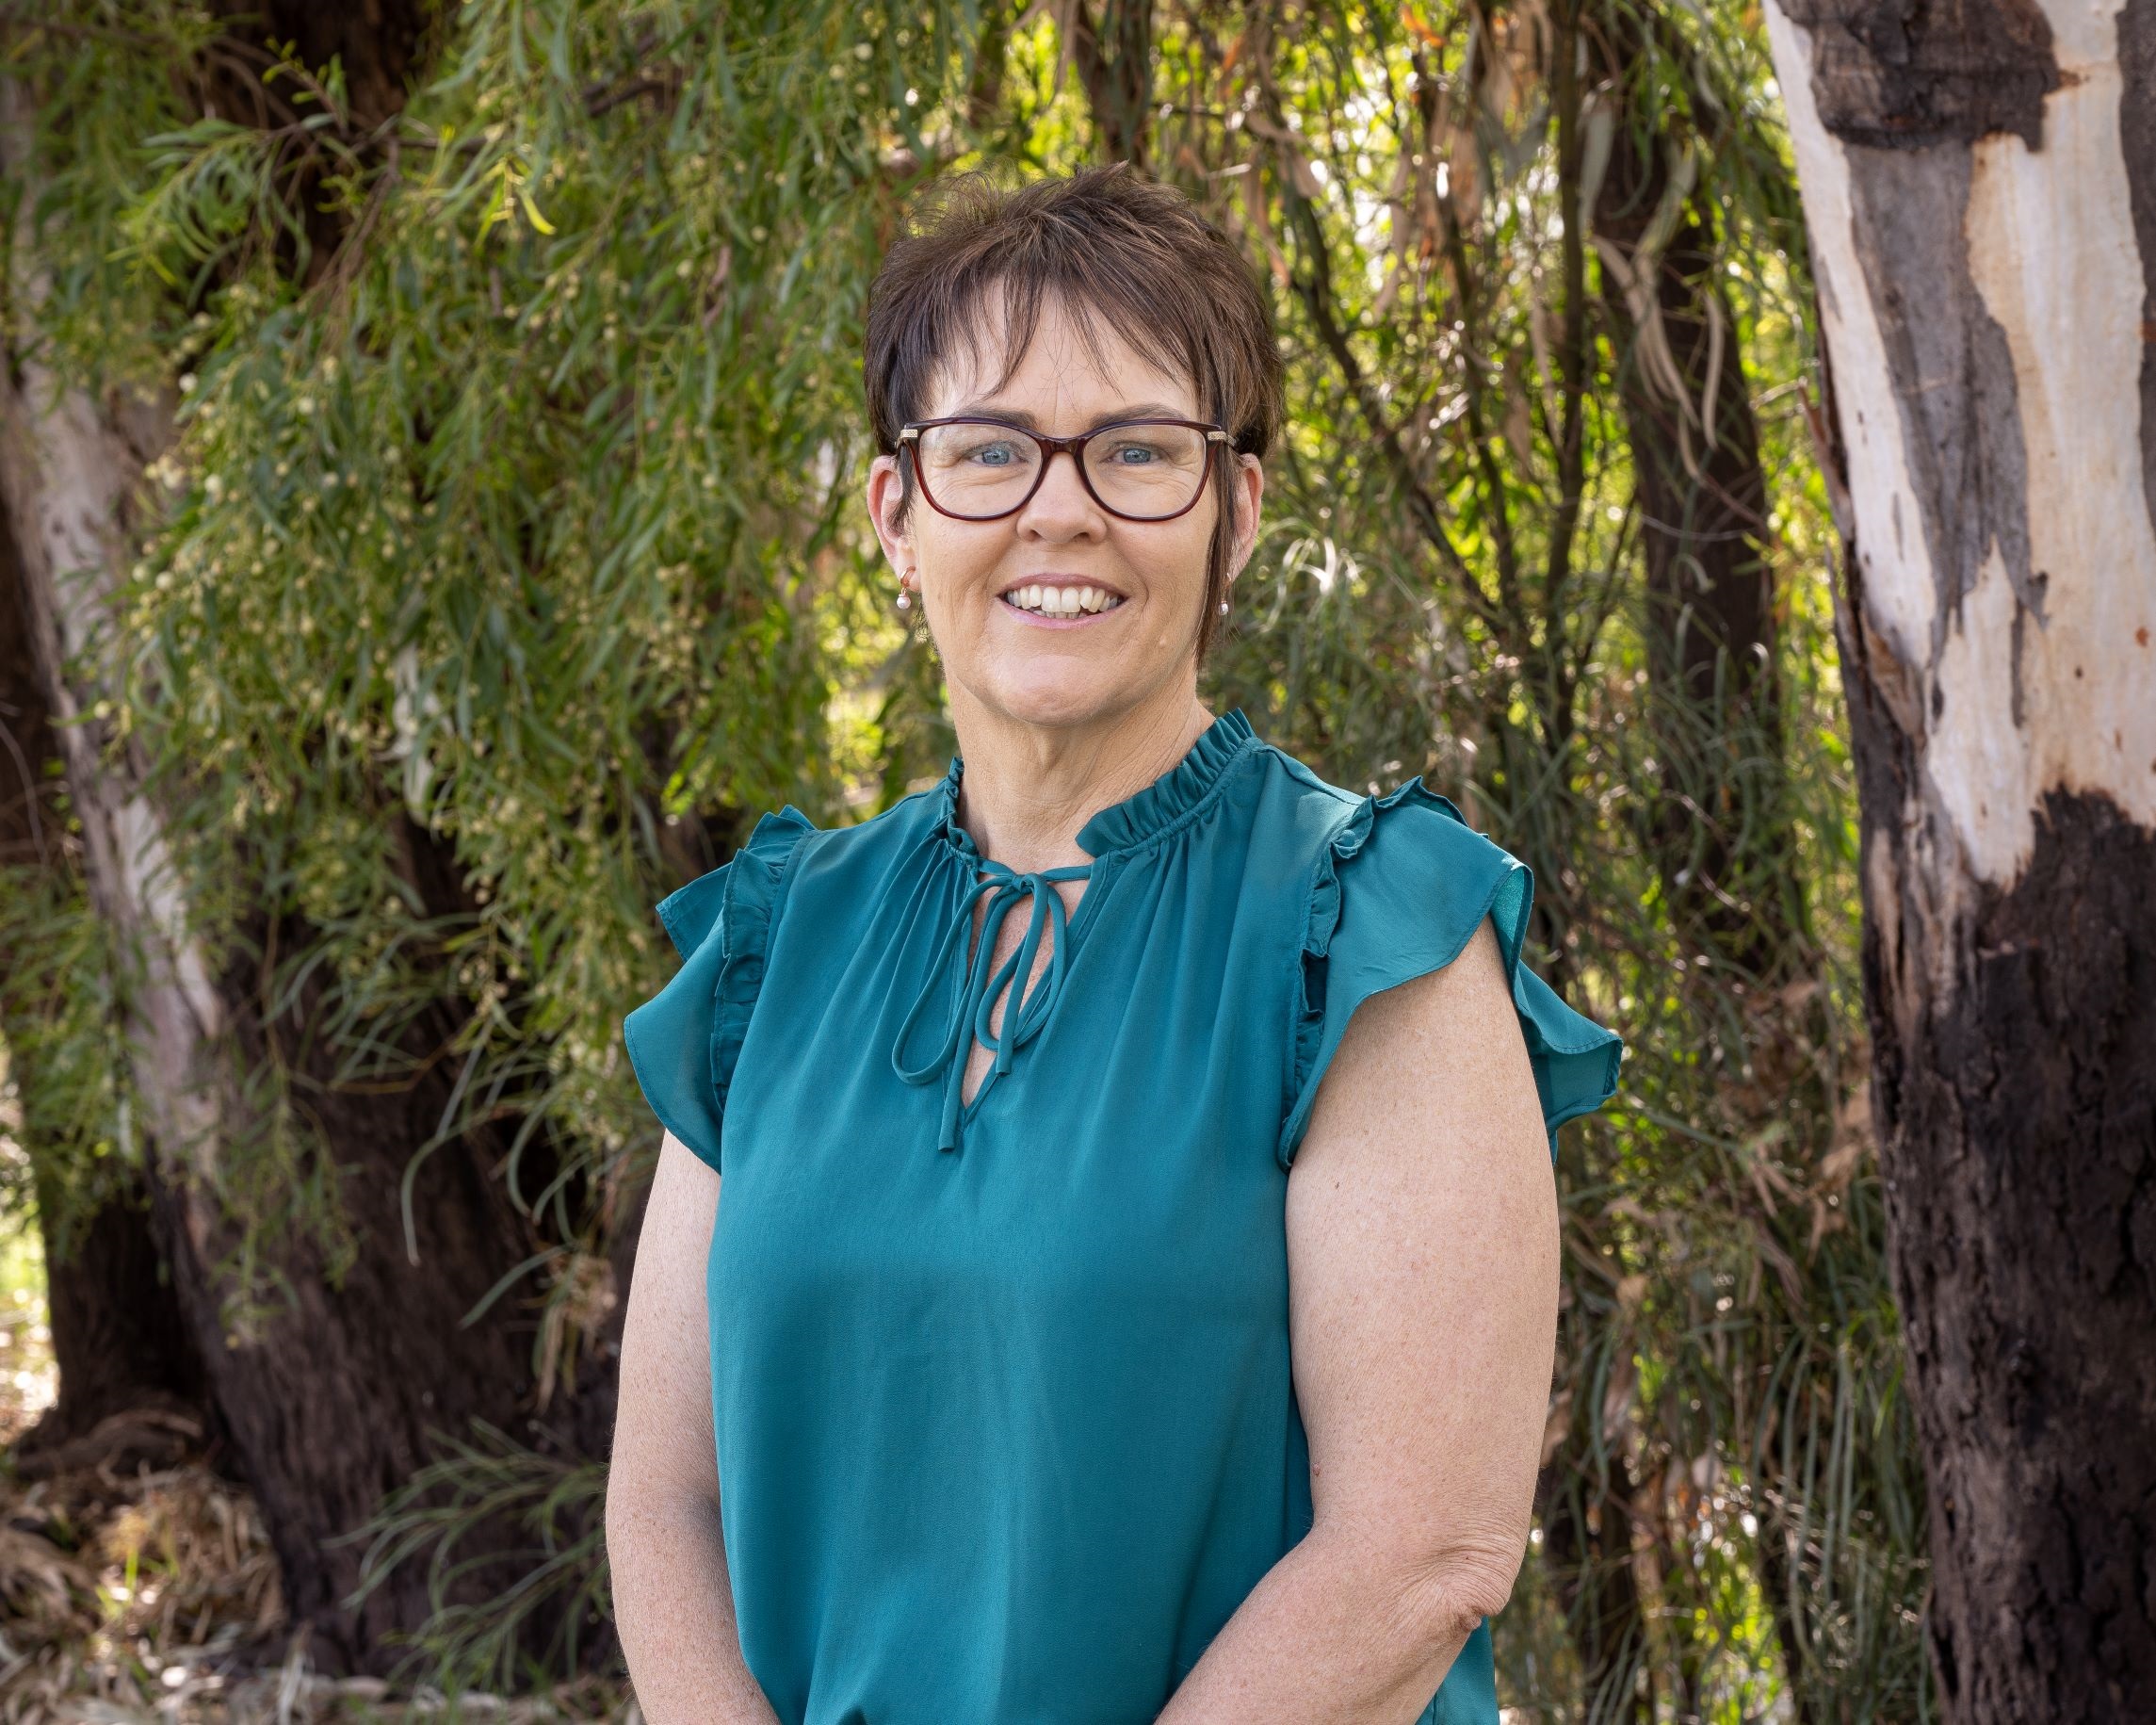 CEO Jodie Taylor wears a dark green shirt and smiles in front of Dalby trees and greenery.